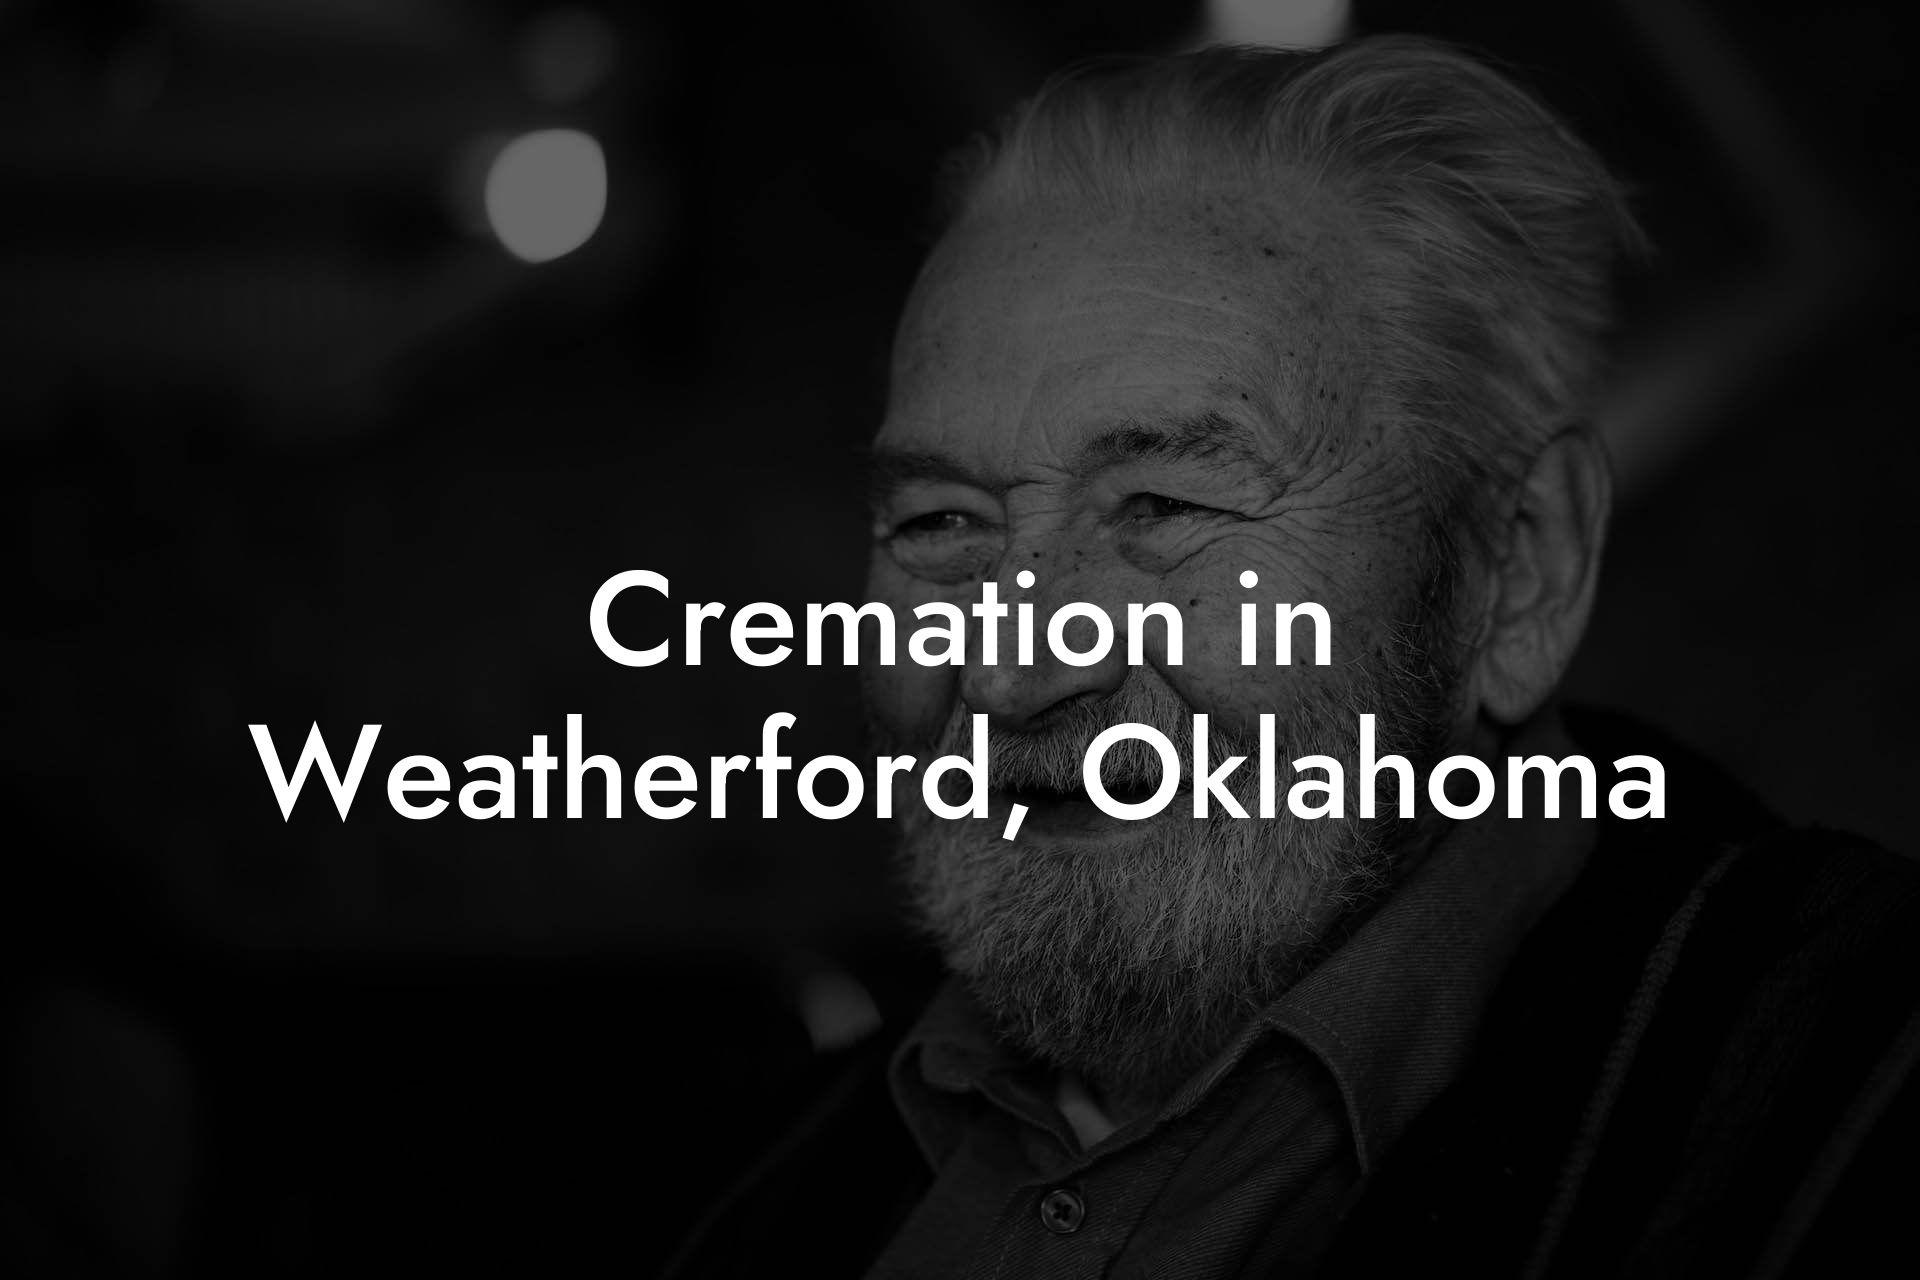 Cremation in Weatherford, Oklahoma